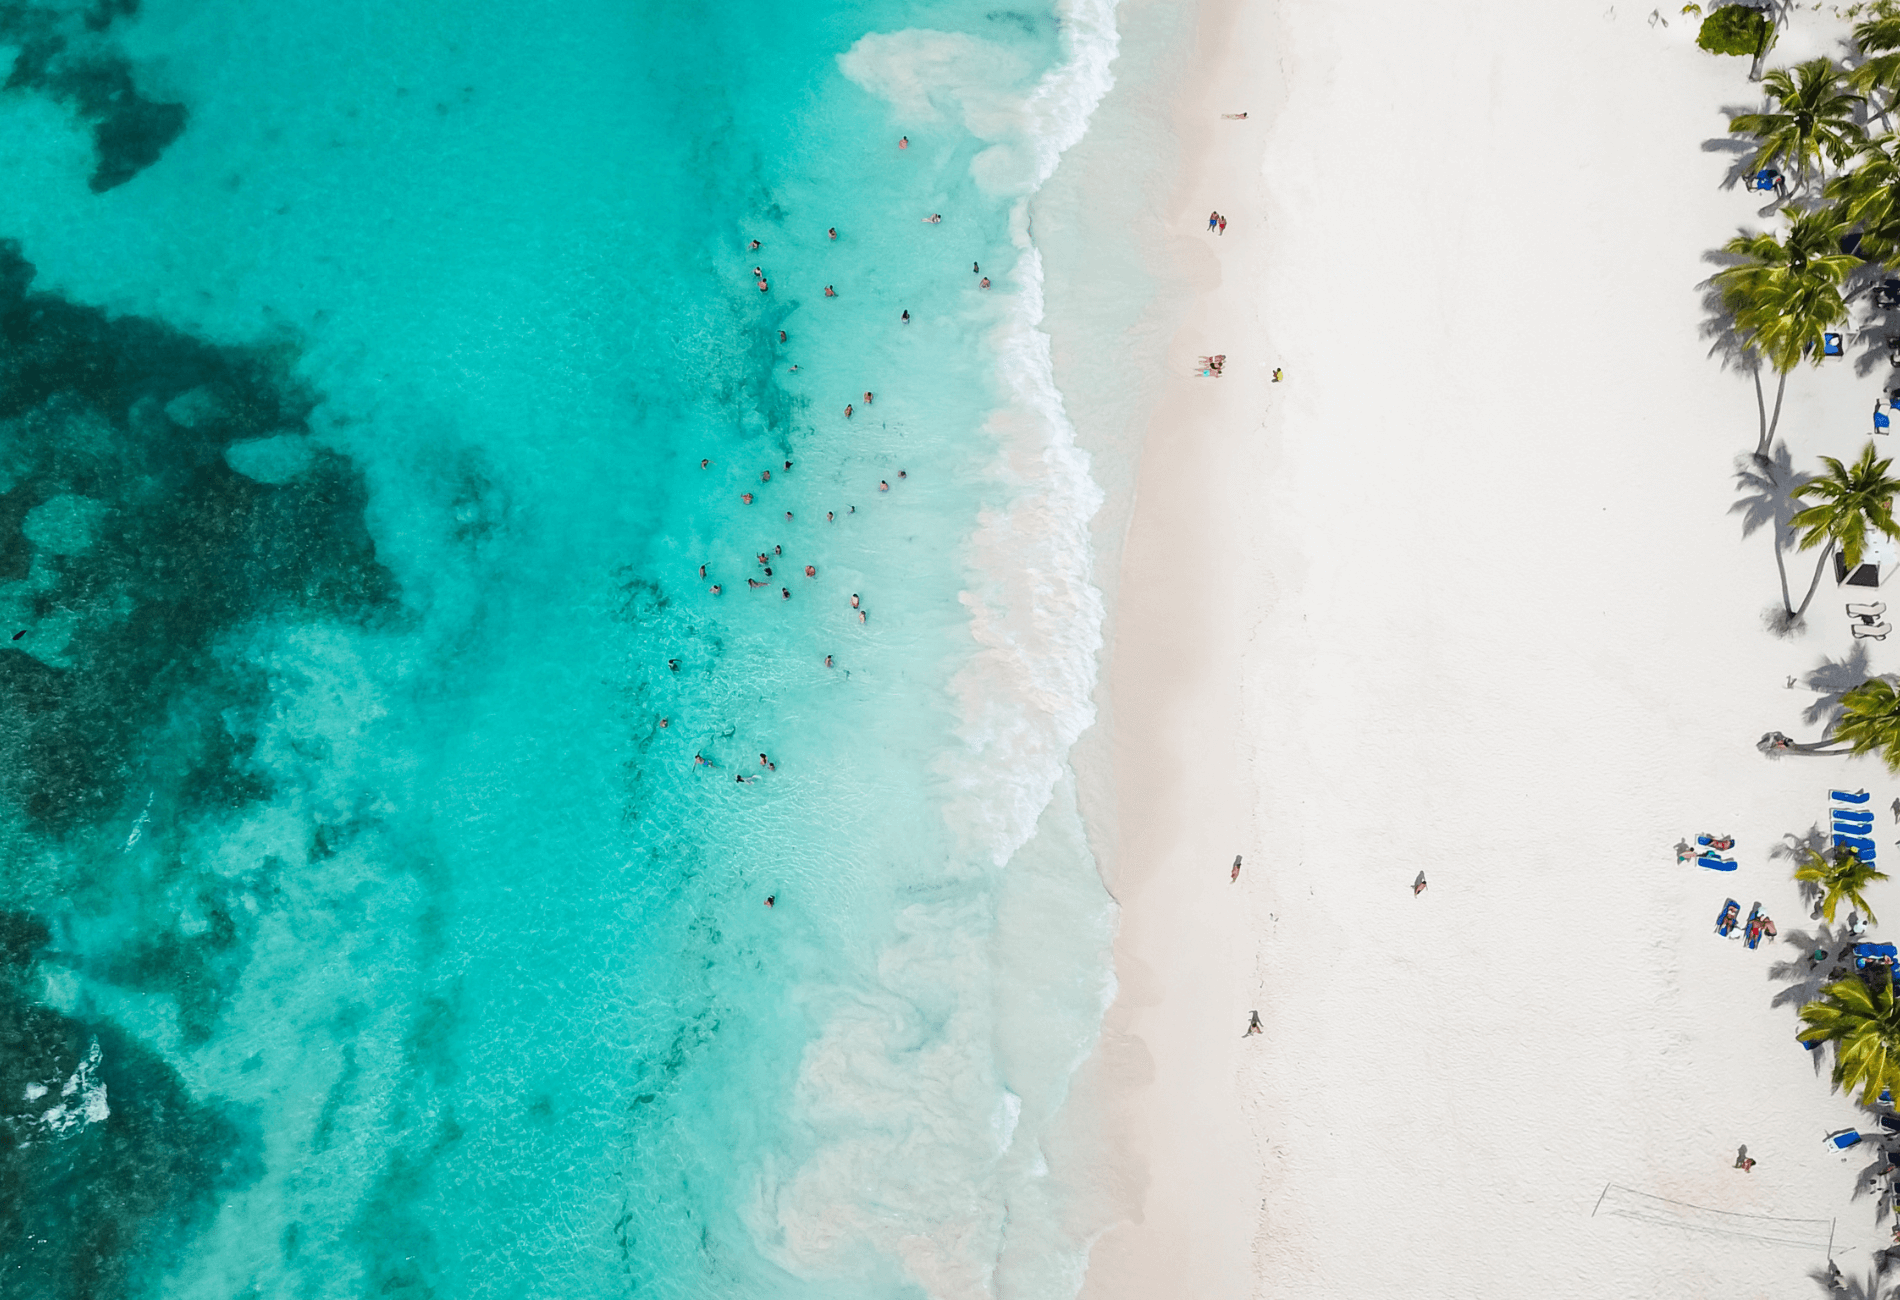 Bird's eye view of Cancun beach. Spirit Airlines is offering fares starting at just $79 one-way to Cancun International Airport.